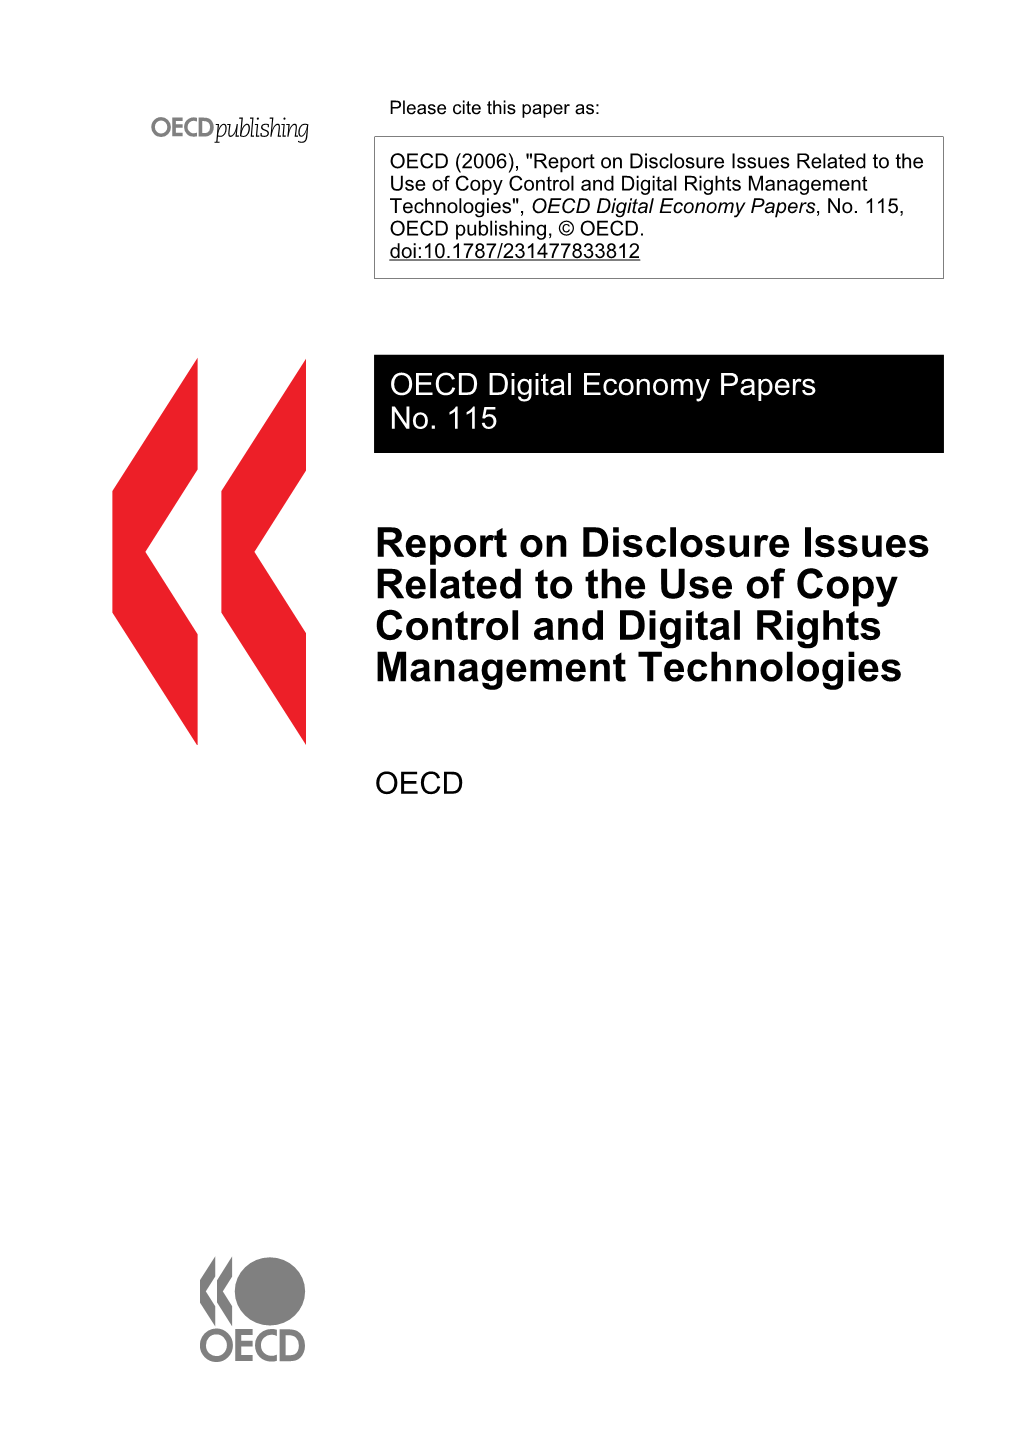 Report on Disclosure Issues Related to the Use of Copy Control and Digital Rights Management Technologies", OECD Digital Economy Papers, No